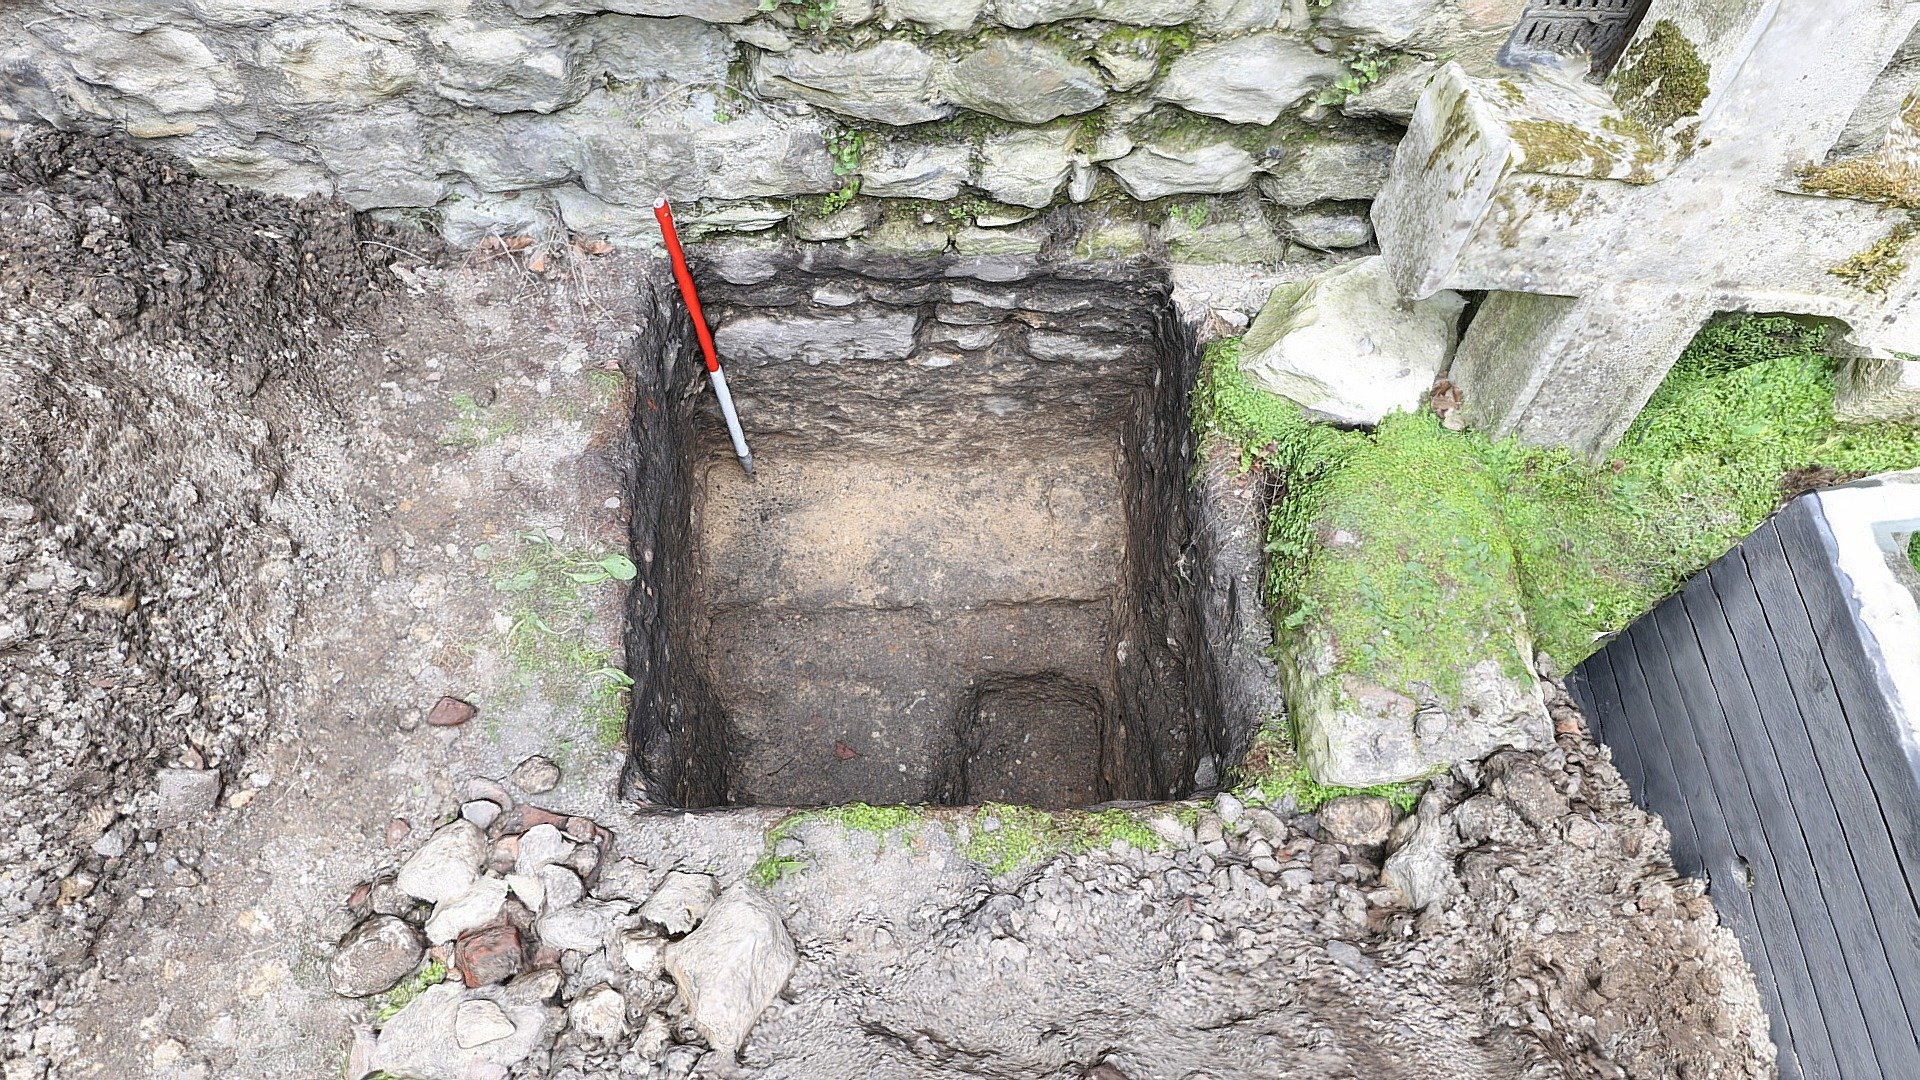 Chapter House excavation (trench 1 of 2)